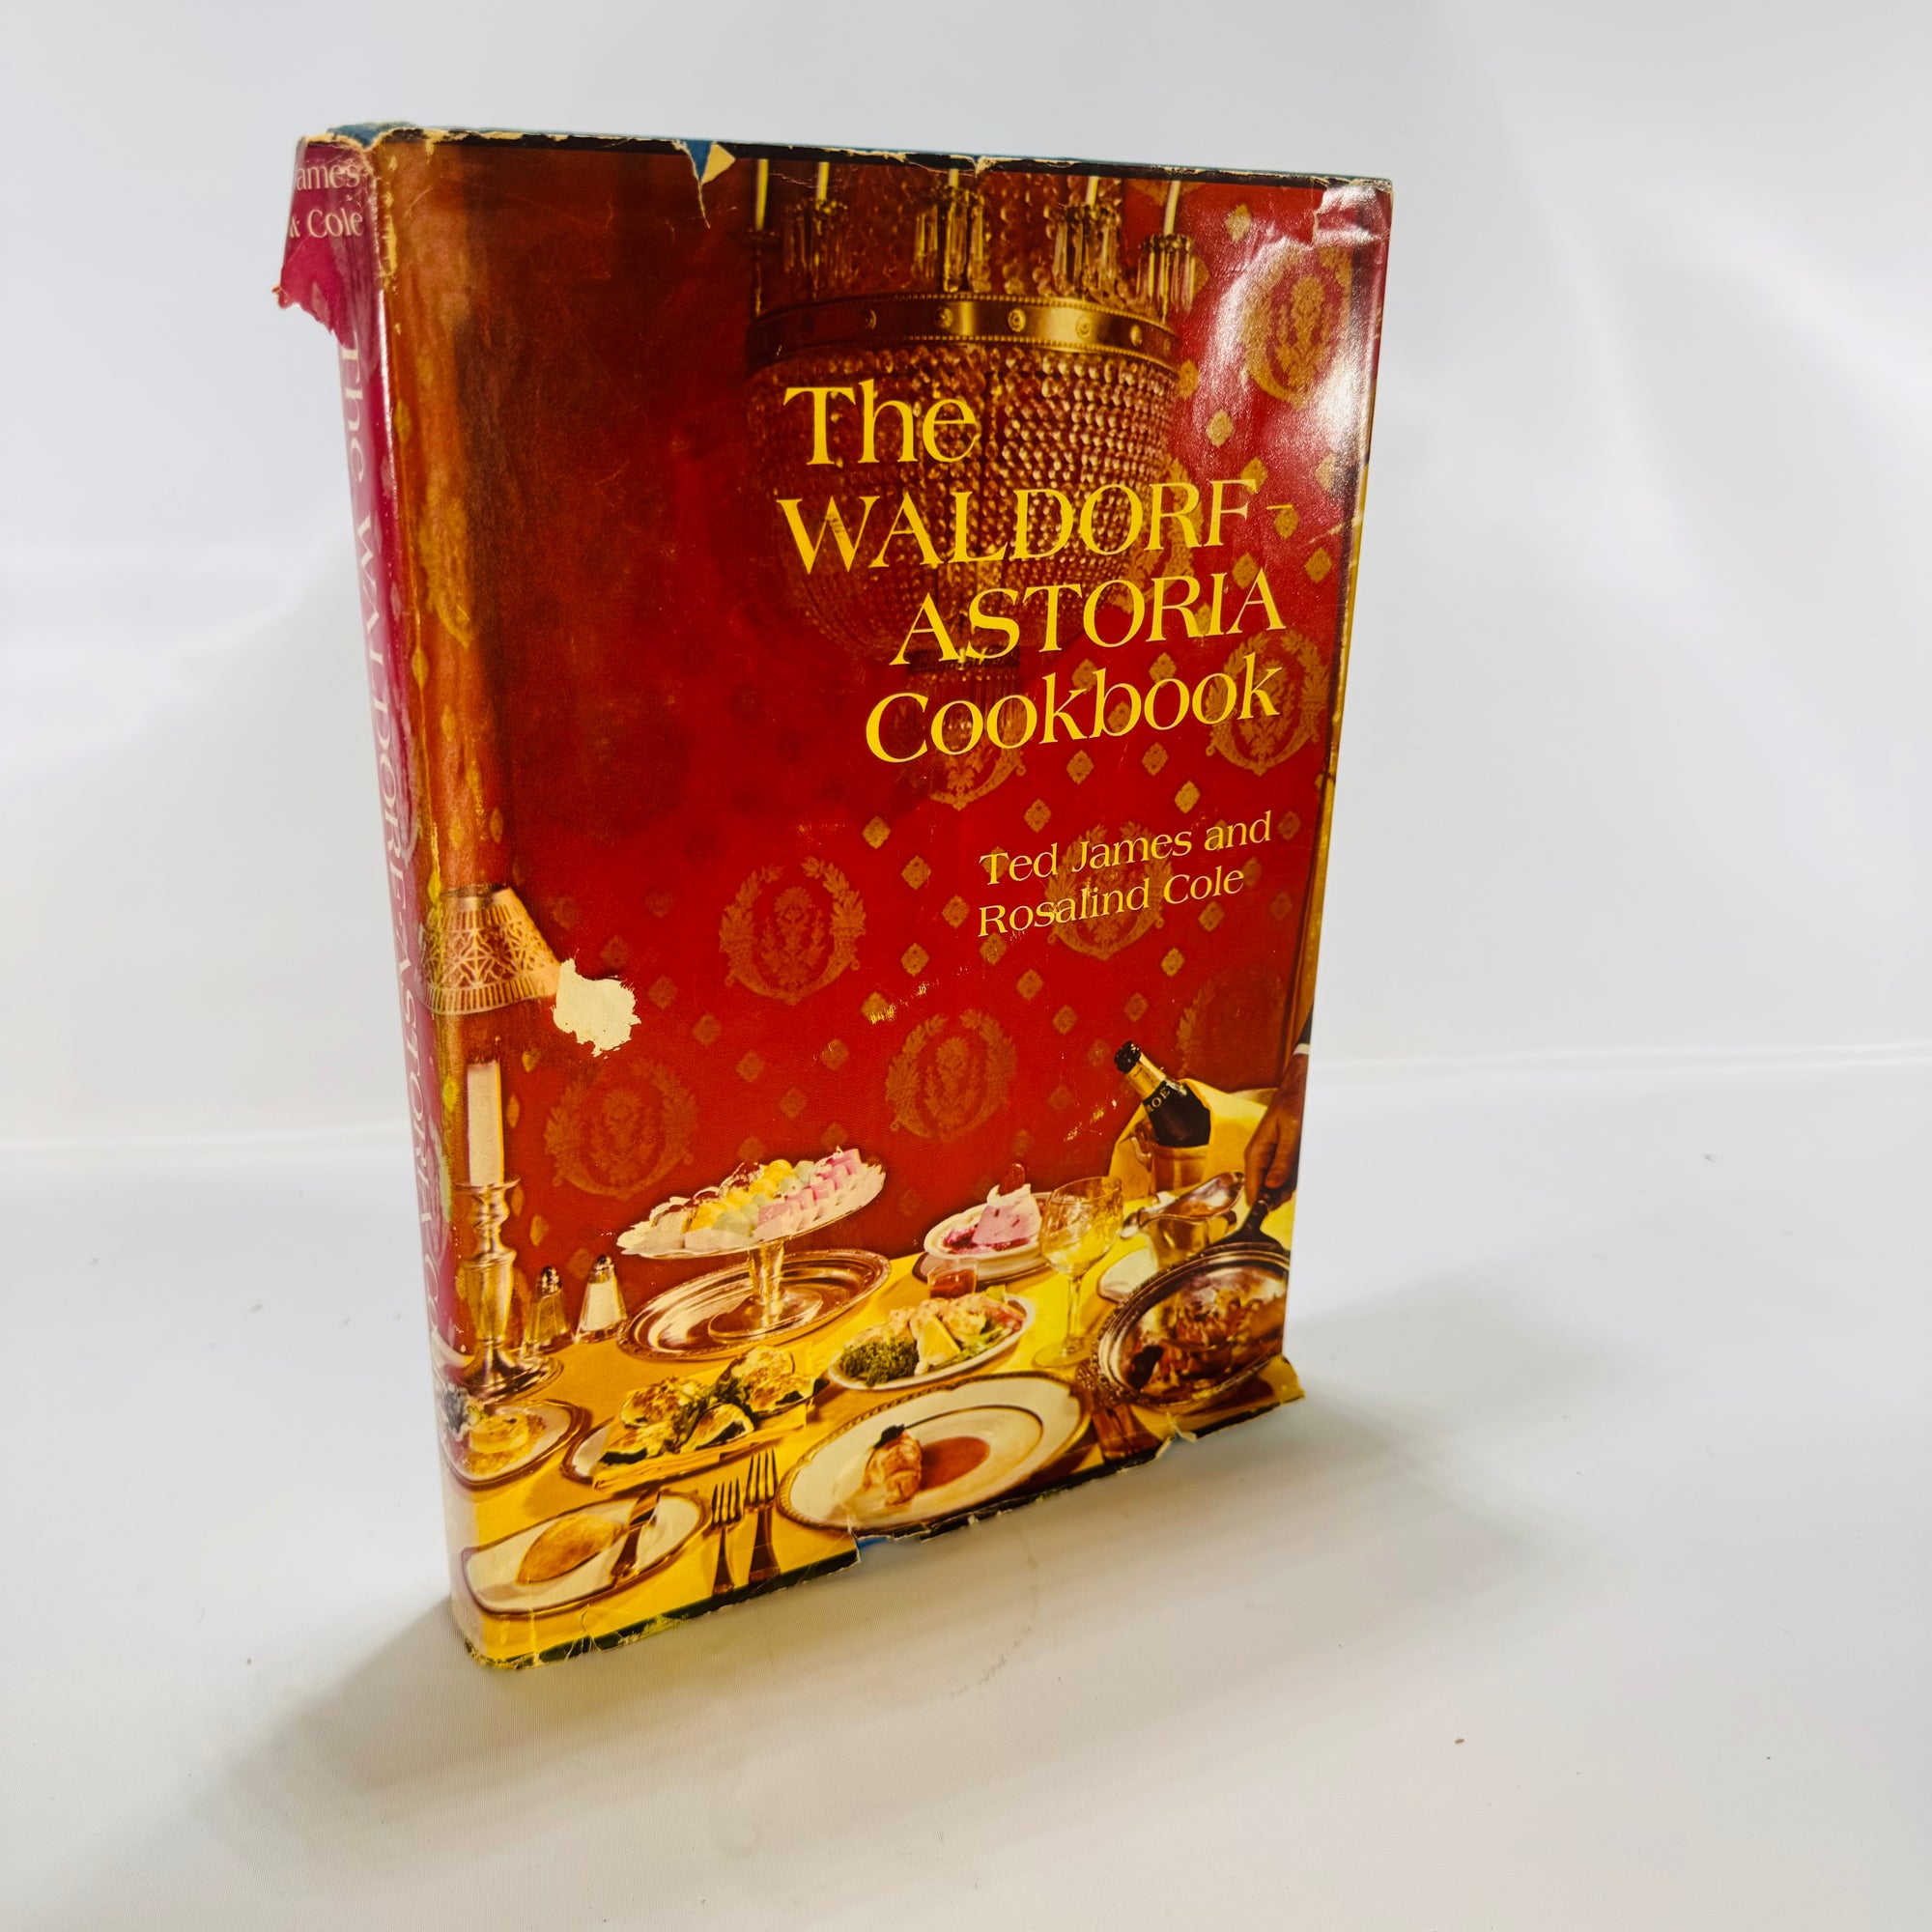 The Waldorf-Astoria Cookbook by Ted James and Rosalind Cole 1969 the Bobbs-Merrill Co.